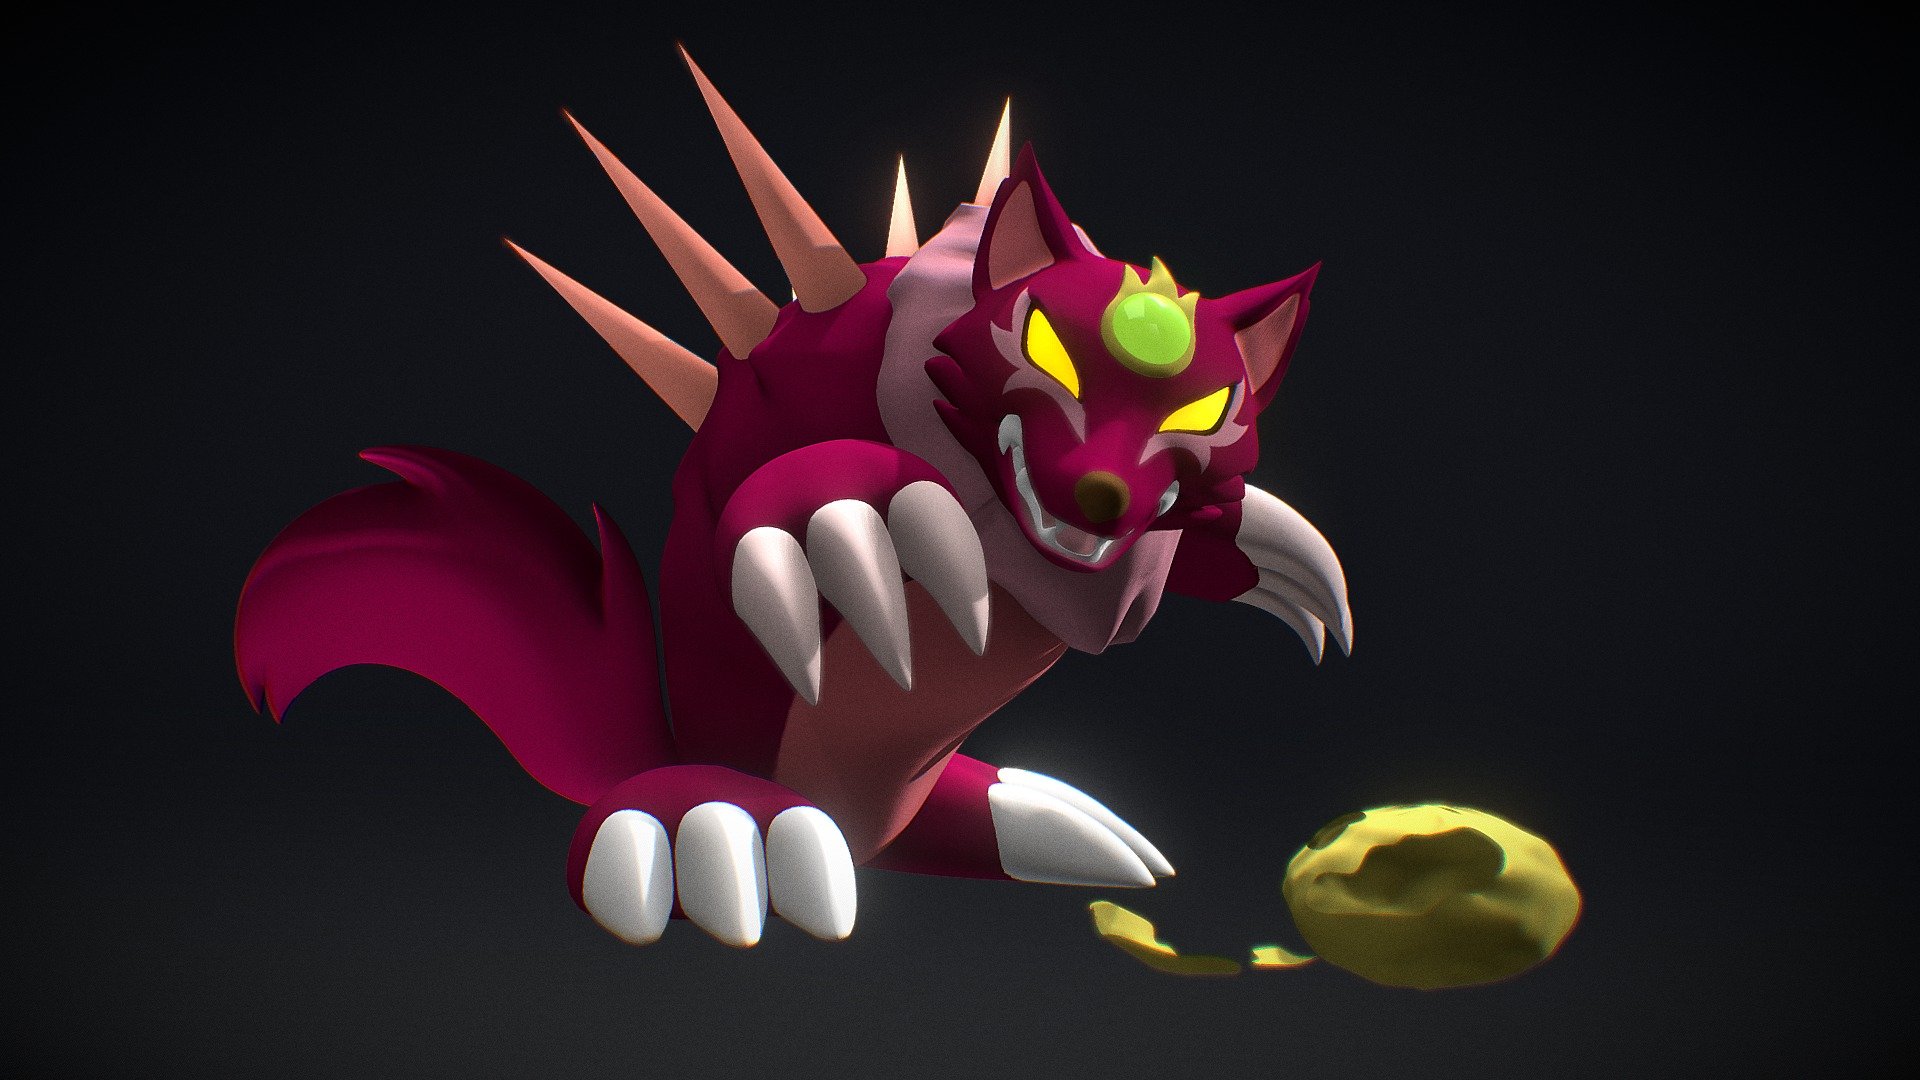 This is Chilidog (Wolfwrath) from the anime Hoshi no Kaabii.
Hope you like it!:D
HERE the cycles render version - Chilidog (Wolfwrath) - 3D model by Wolfwrathknight 3d model